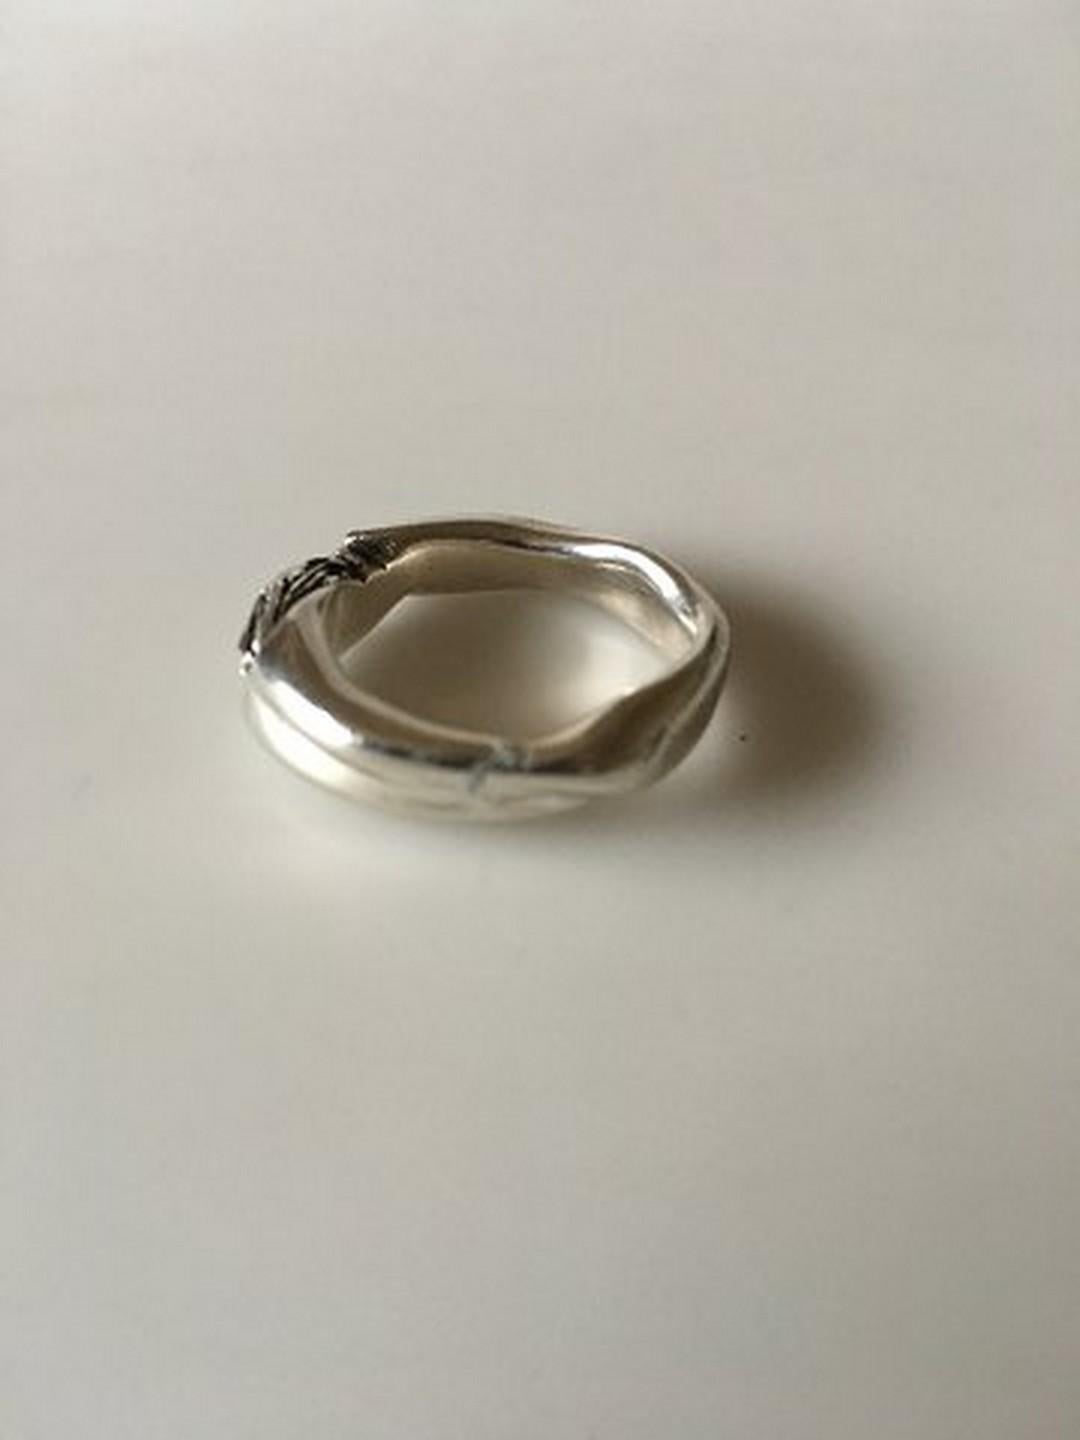 Georg Jensen Sterling Silver Ring No 363 by Ole Kortzau. Ring Size 56 / US 7 1/2. Weighs 9.75 g / 0.35 oz.